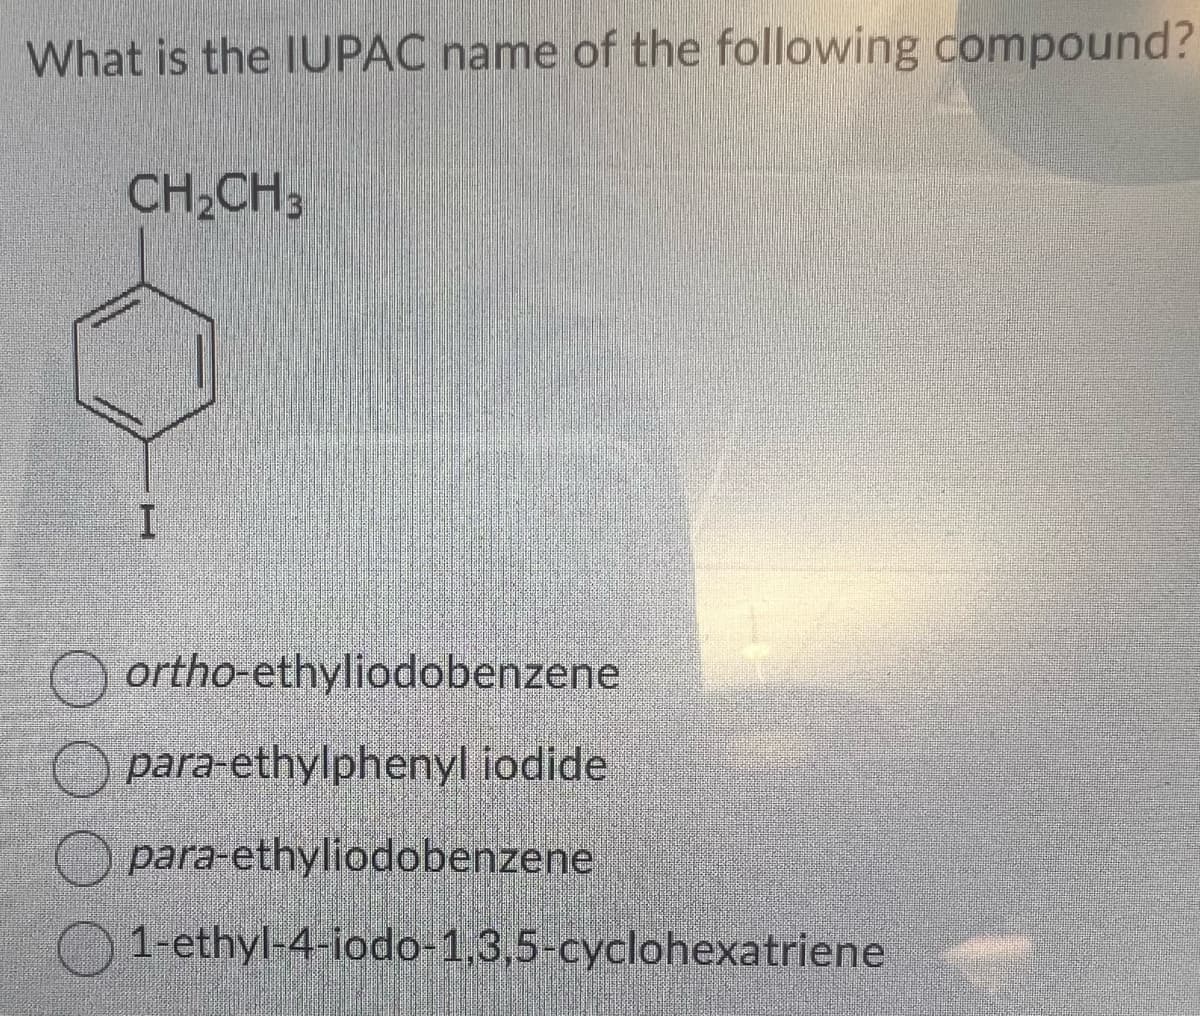 What is the IUPAC name of the following compound?
CH₂CH3
I
ortho-ethyliodobenzene
para-ethylphenyl iodide
para-ethyliodobenzene
1-ethyl-4-iodo-1,3,5-cyclohexatriene